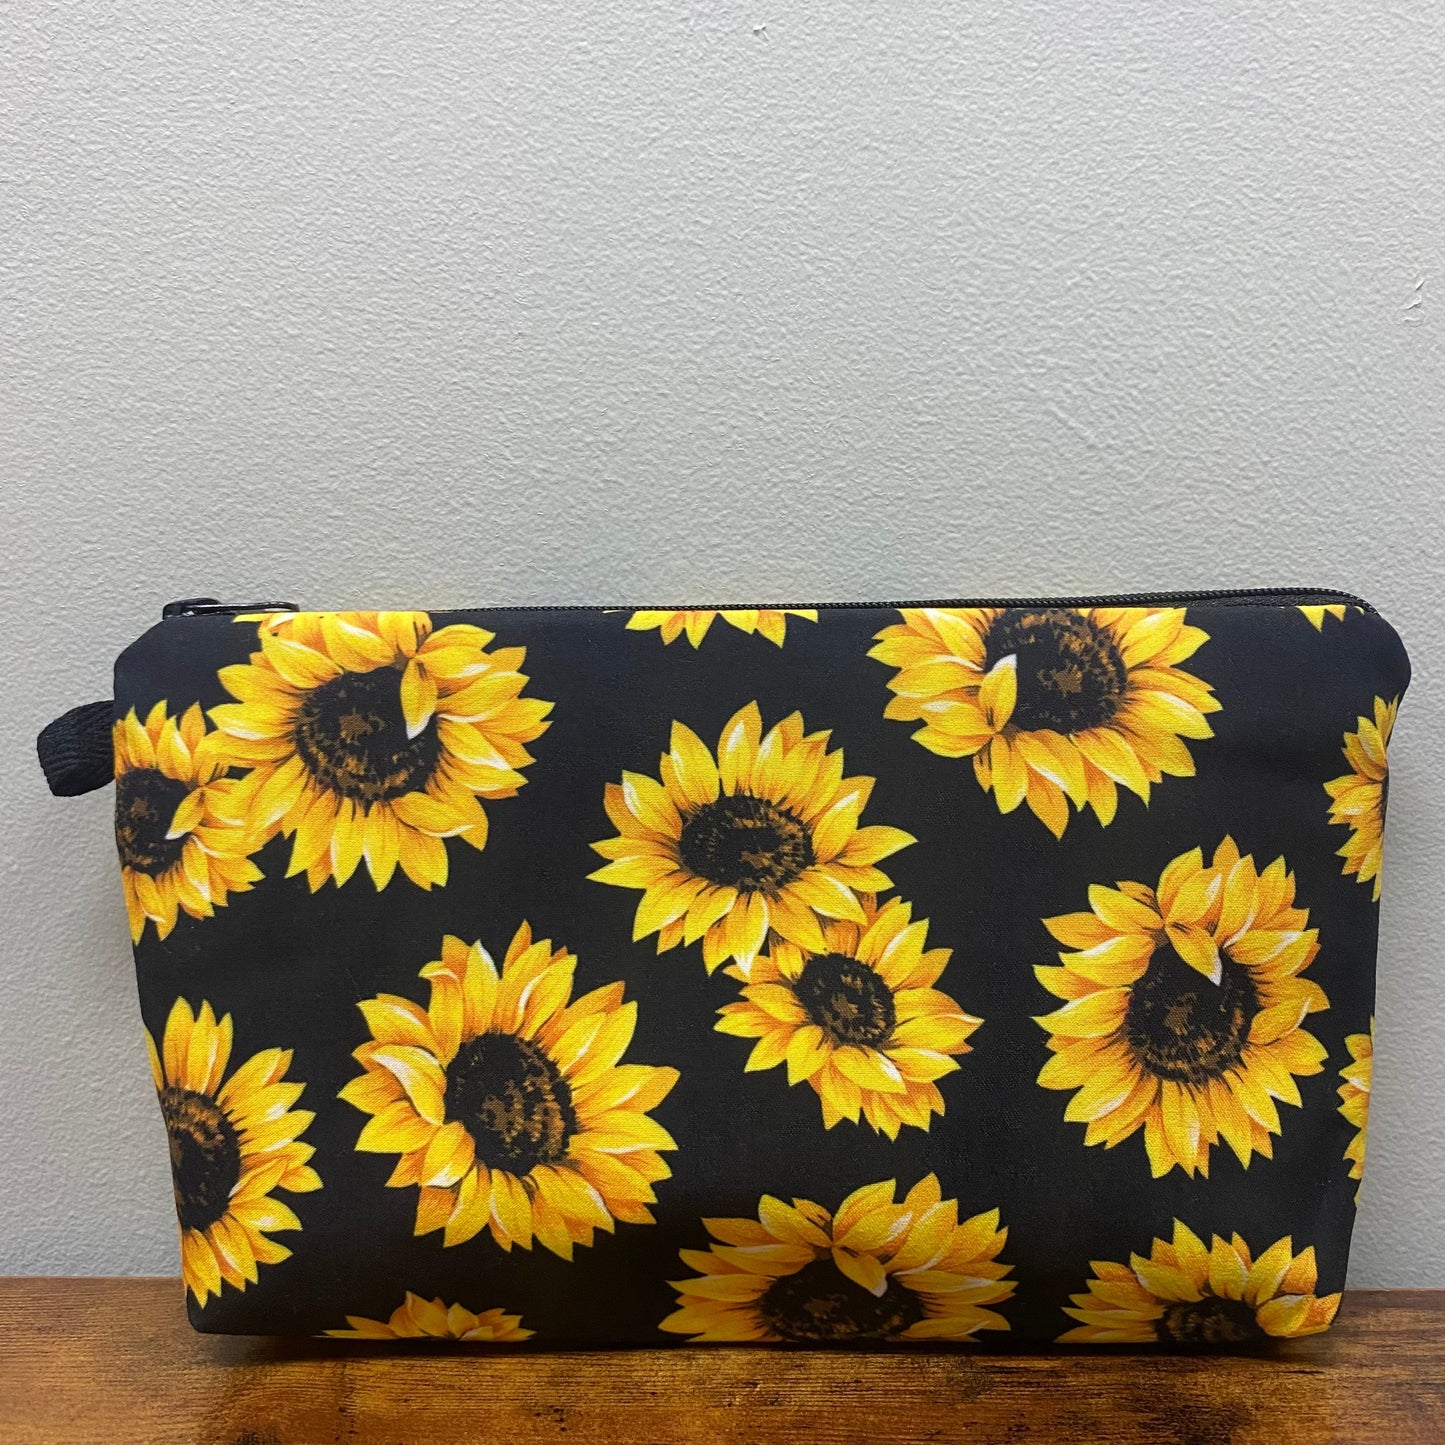 Large Sunflowers - Water-Resistant Multi-Use Pouch